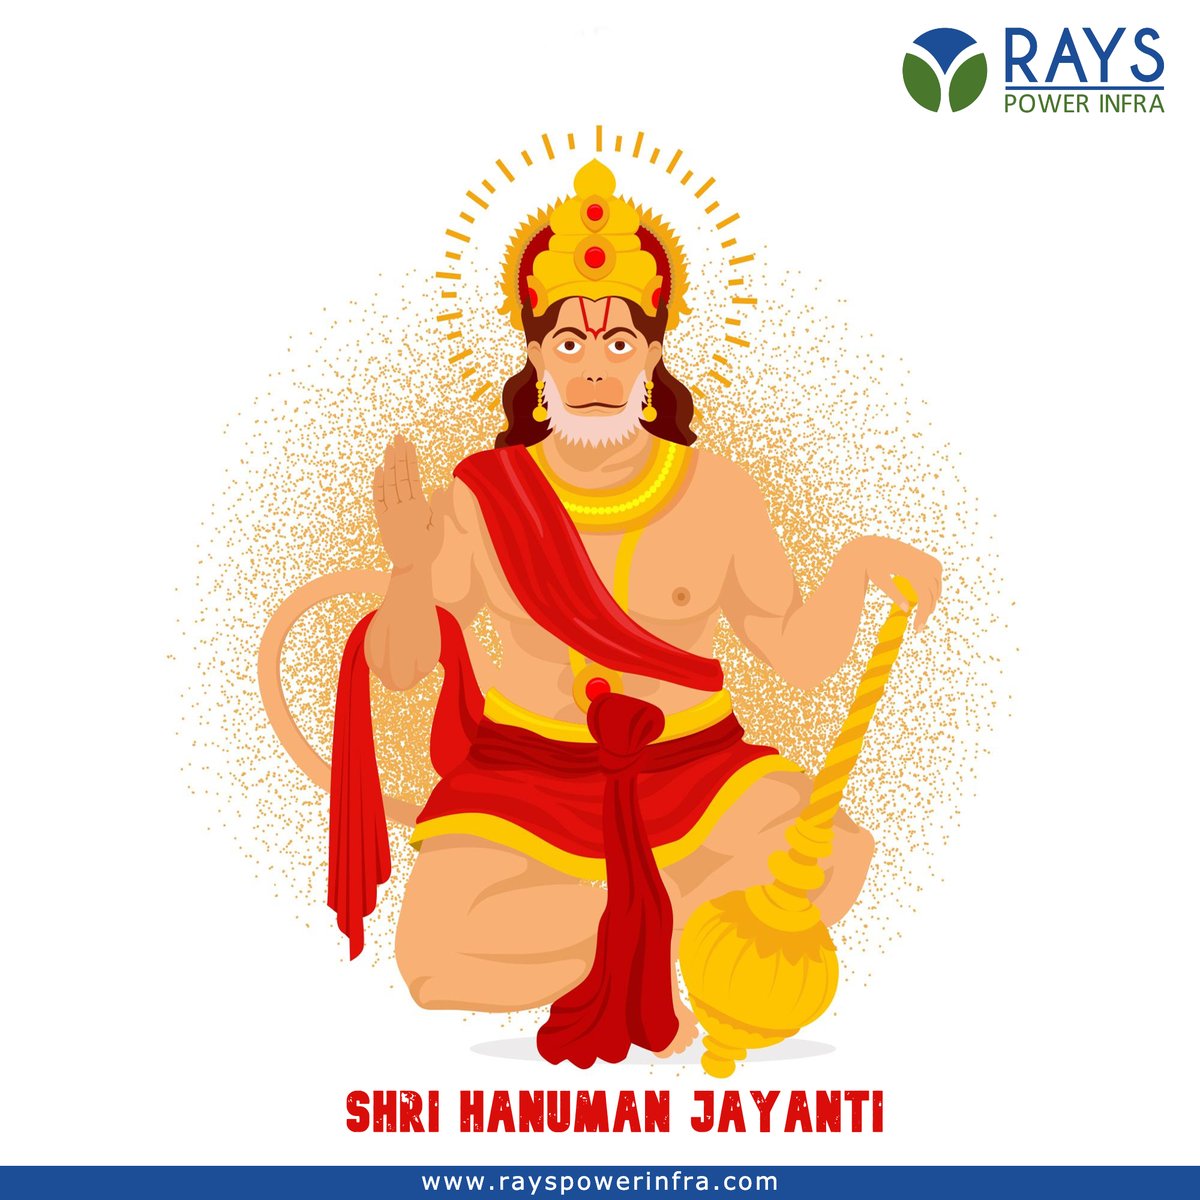 May Lord Hanuman bless your life with happiness, peace, and prosperity. Wish you all a very Happy Hanuman Jayanti!

#raise_with_rays #rays_power_infra #solar_company #solarepc #solarpower #sustainableenergy #solarproject #renewalenergy #hanuman #hanumanjayanti2024